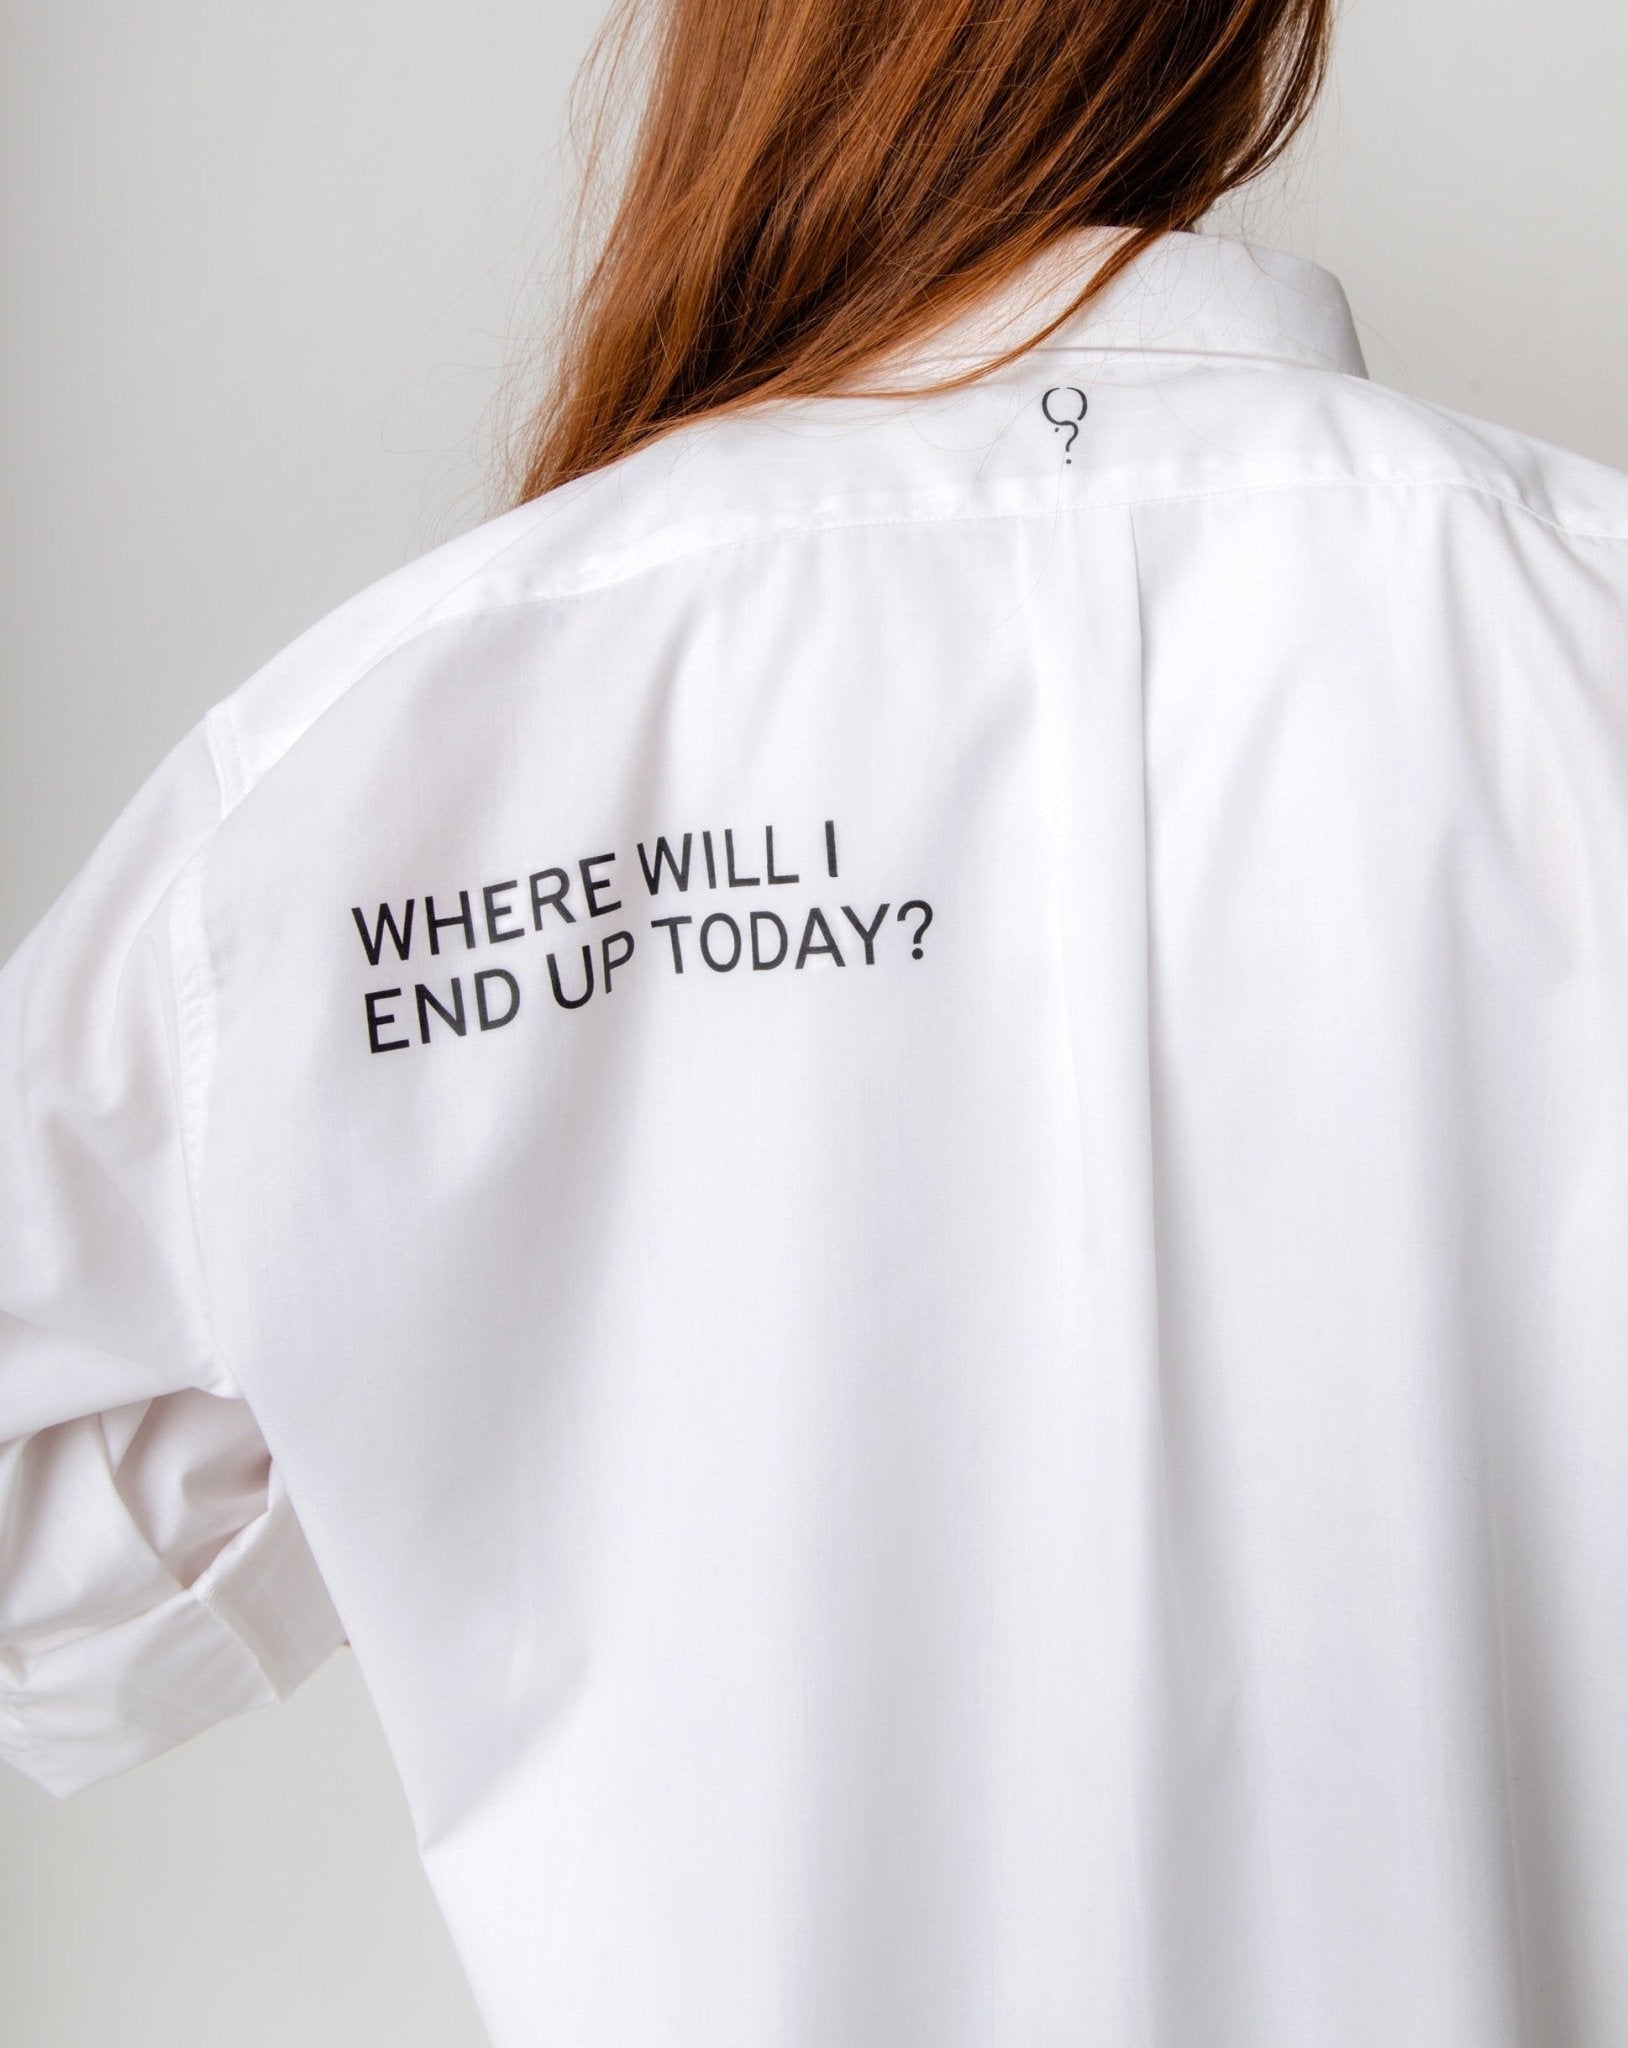 White Shirt 'WHERE WILL I END UP TODAY?' - OBLIVIOUS?